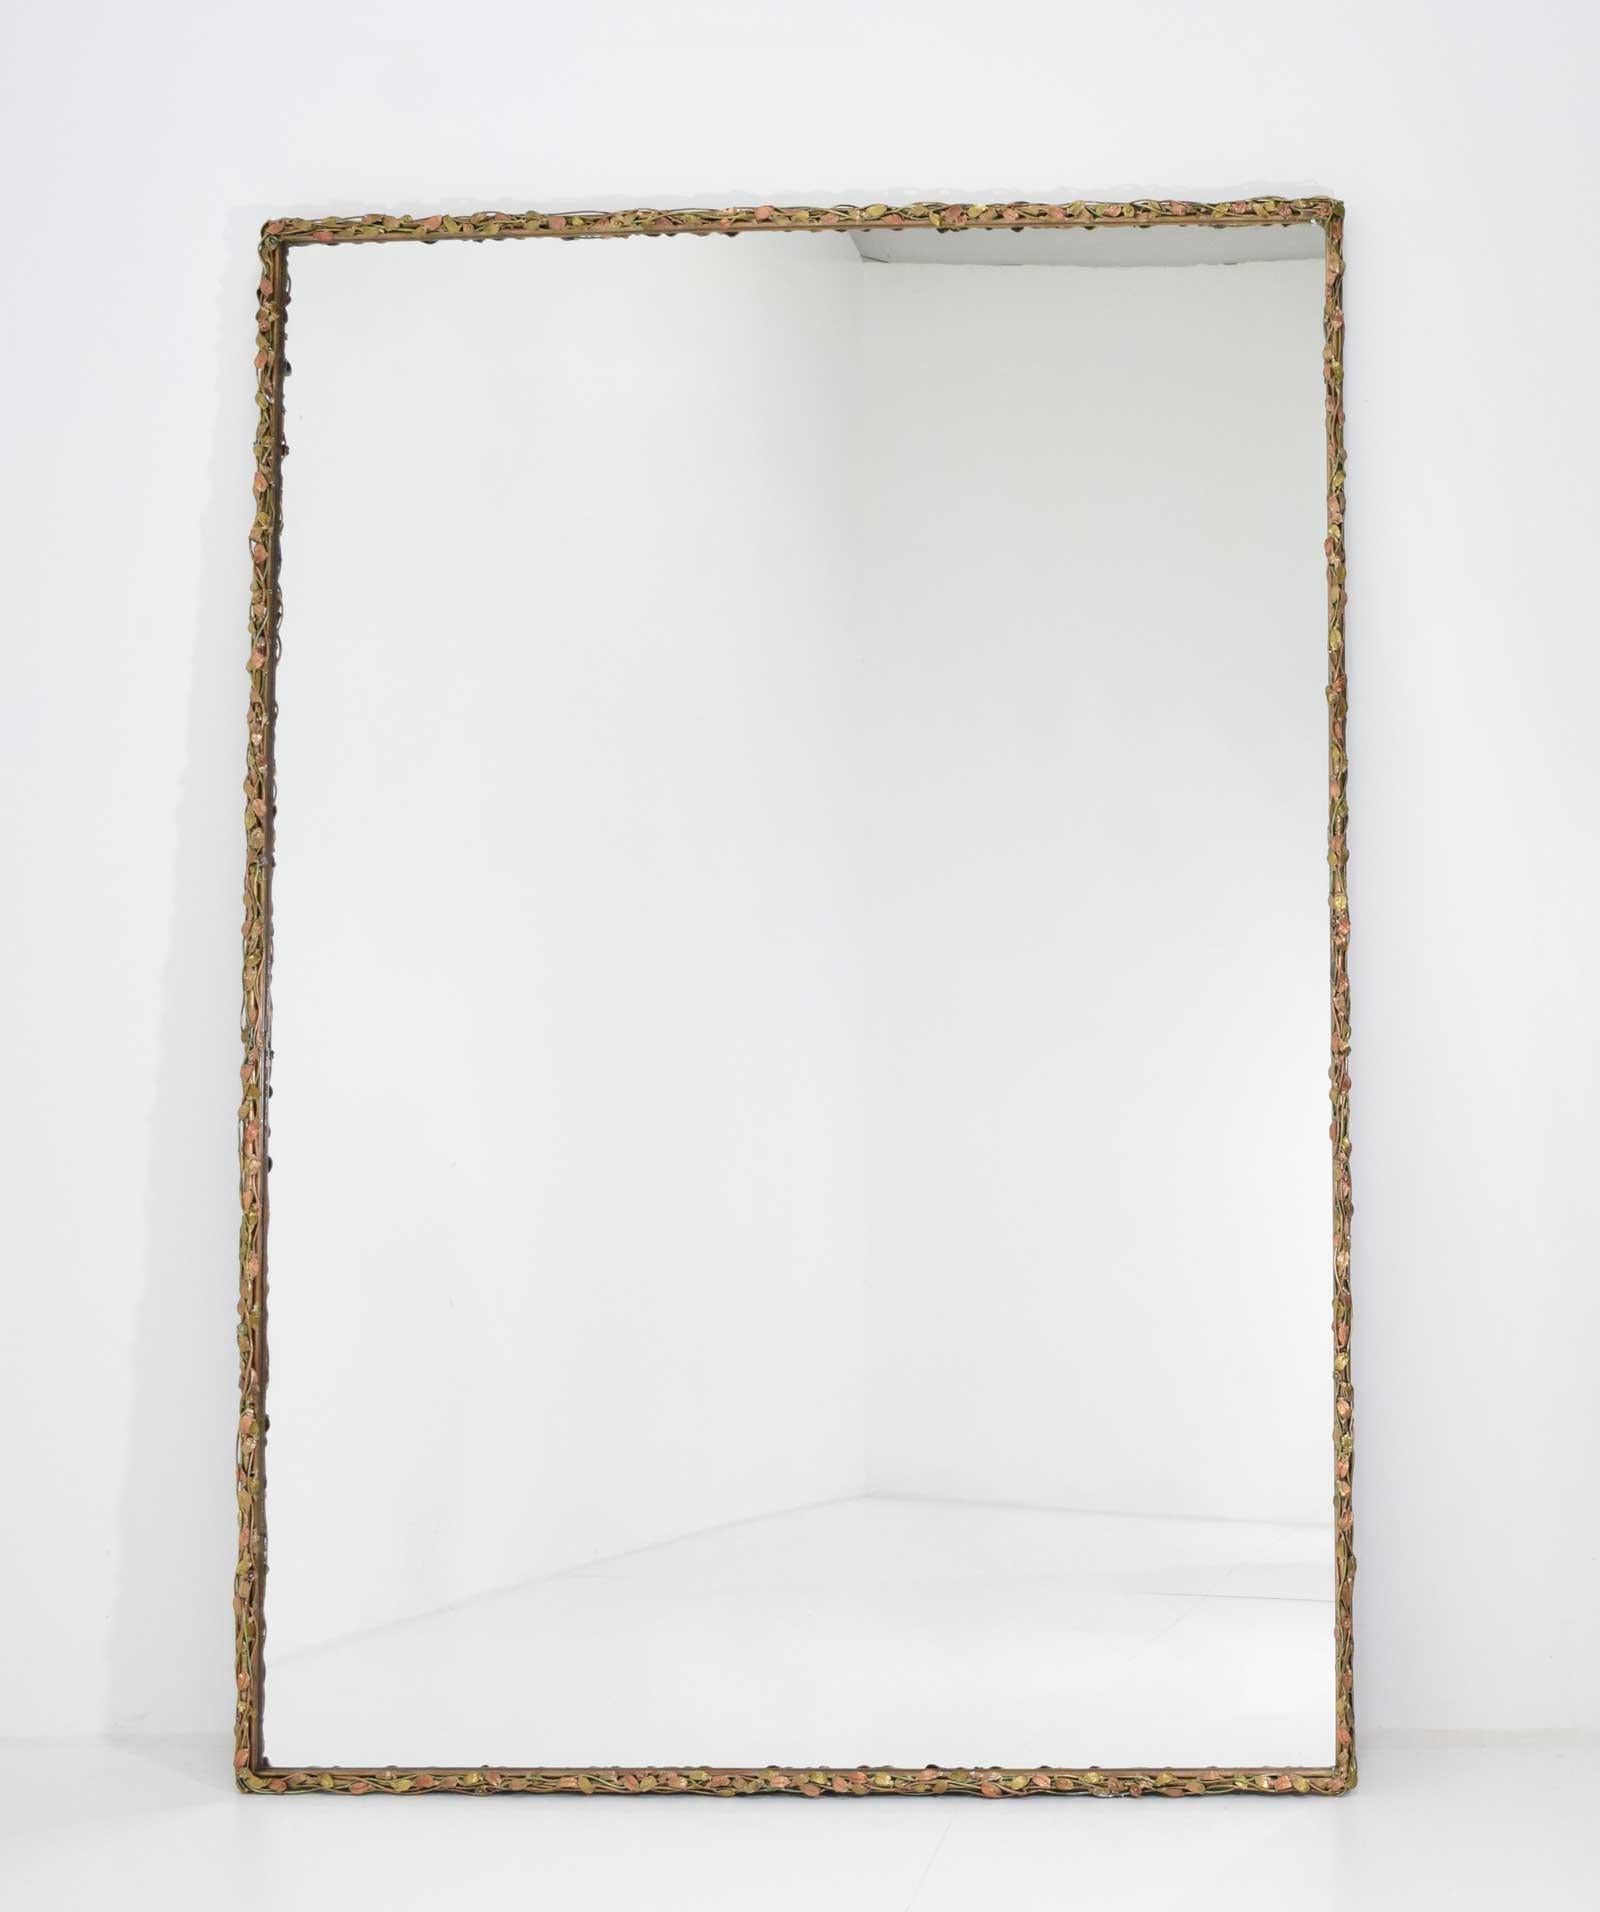 Large bronze framed mirror by sculptor Jeffrey Sass for private collection, 20th century.
Thin frame with brass and copper-finished vines decorated with applied 